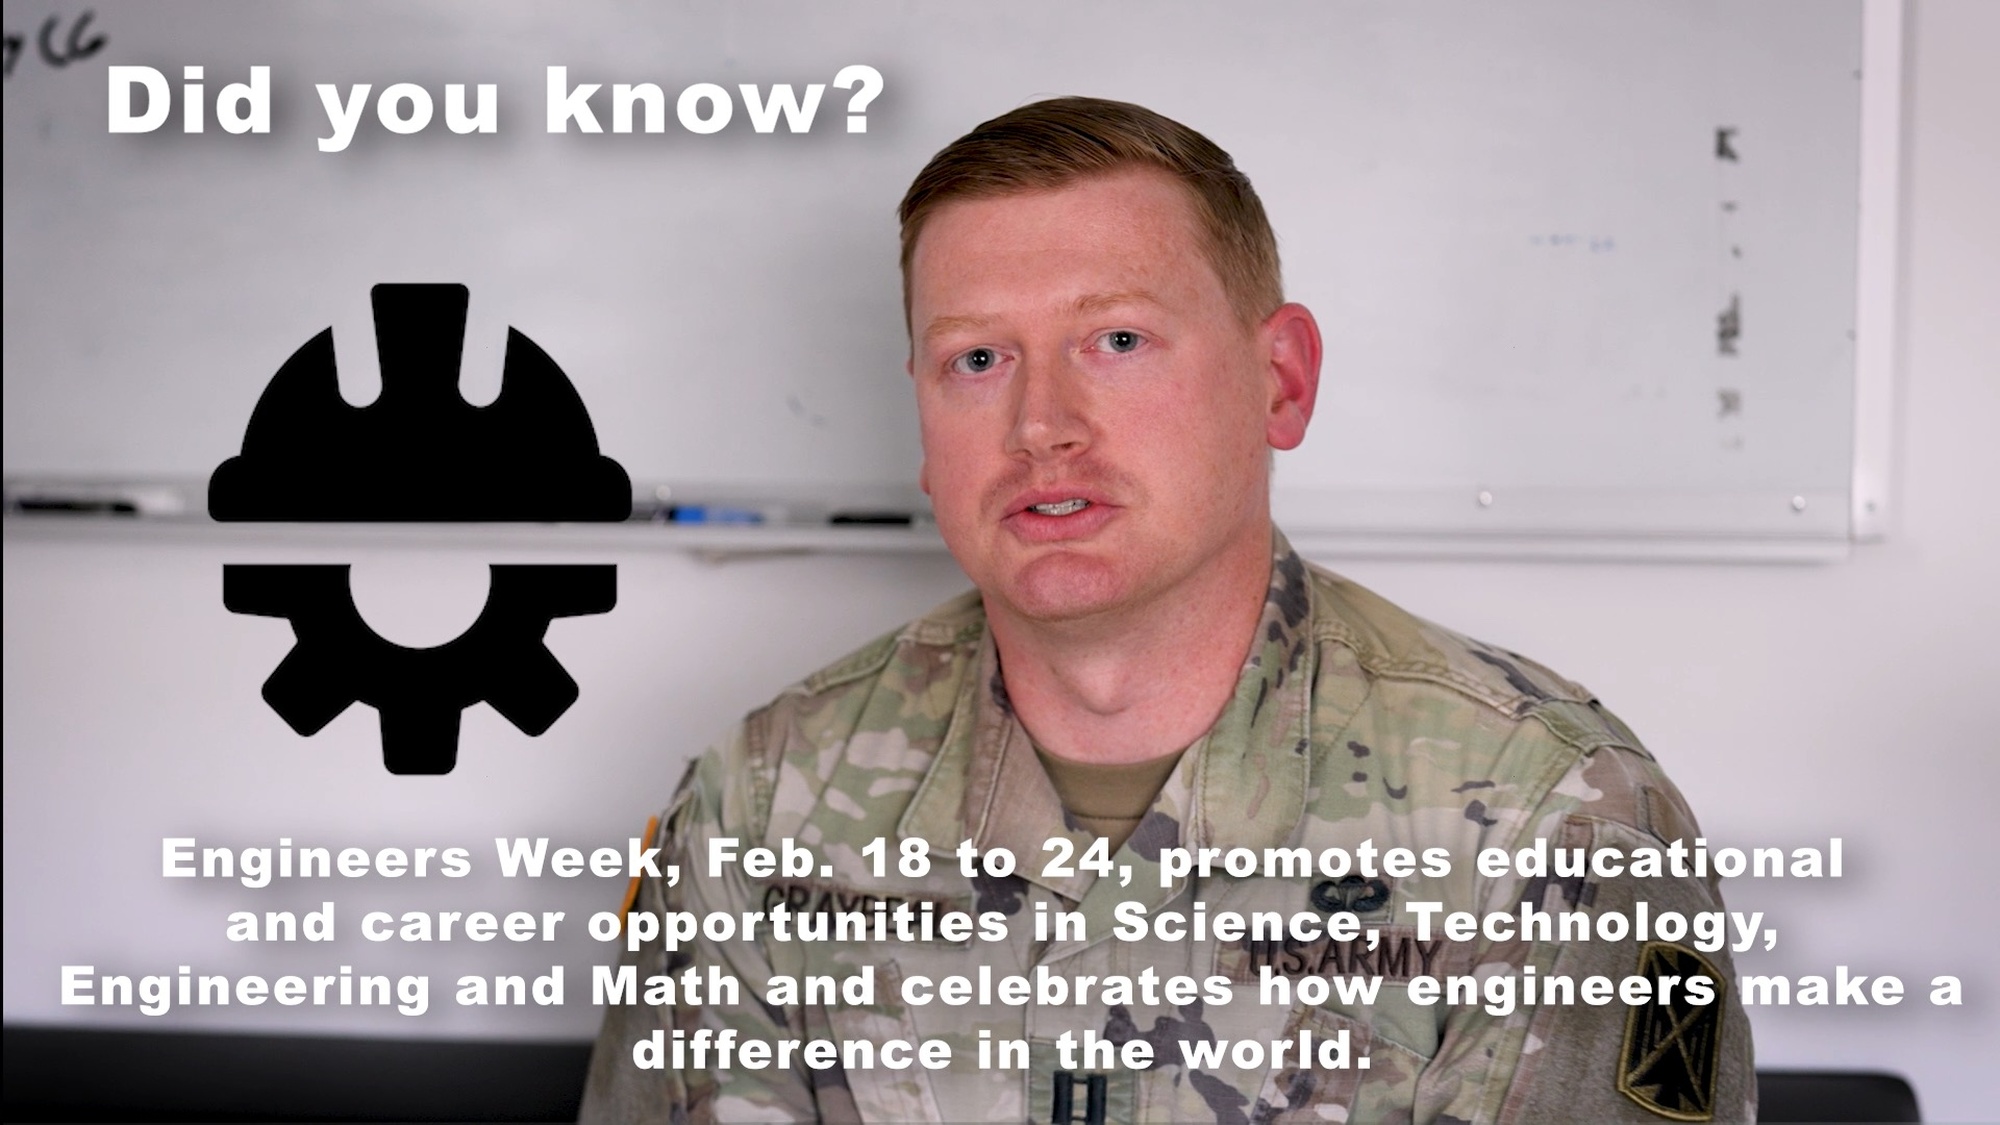 U.S. Army Capt. Thomas Graybeal, 10th AAMDC Engineer Staff Officer, shares his unique experiences and opportunities since commissioning as an engineer Feb. 14 in Sembach Germany. Graybeal also has a civilian degree in engineering, but wanted to expand his knowledge through an Army career. Army Engineers proudly serve their nation as problem solvers and technical experts, making a difference every day at home and abroad. (U.S. Army video by Sgt. Yesenia Cadavid).